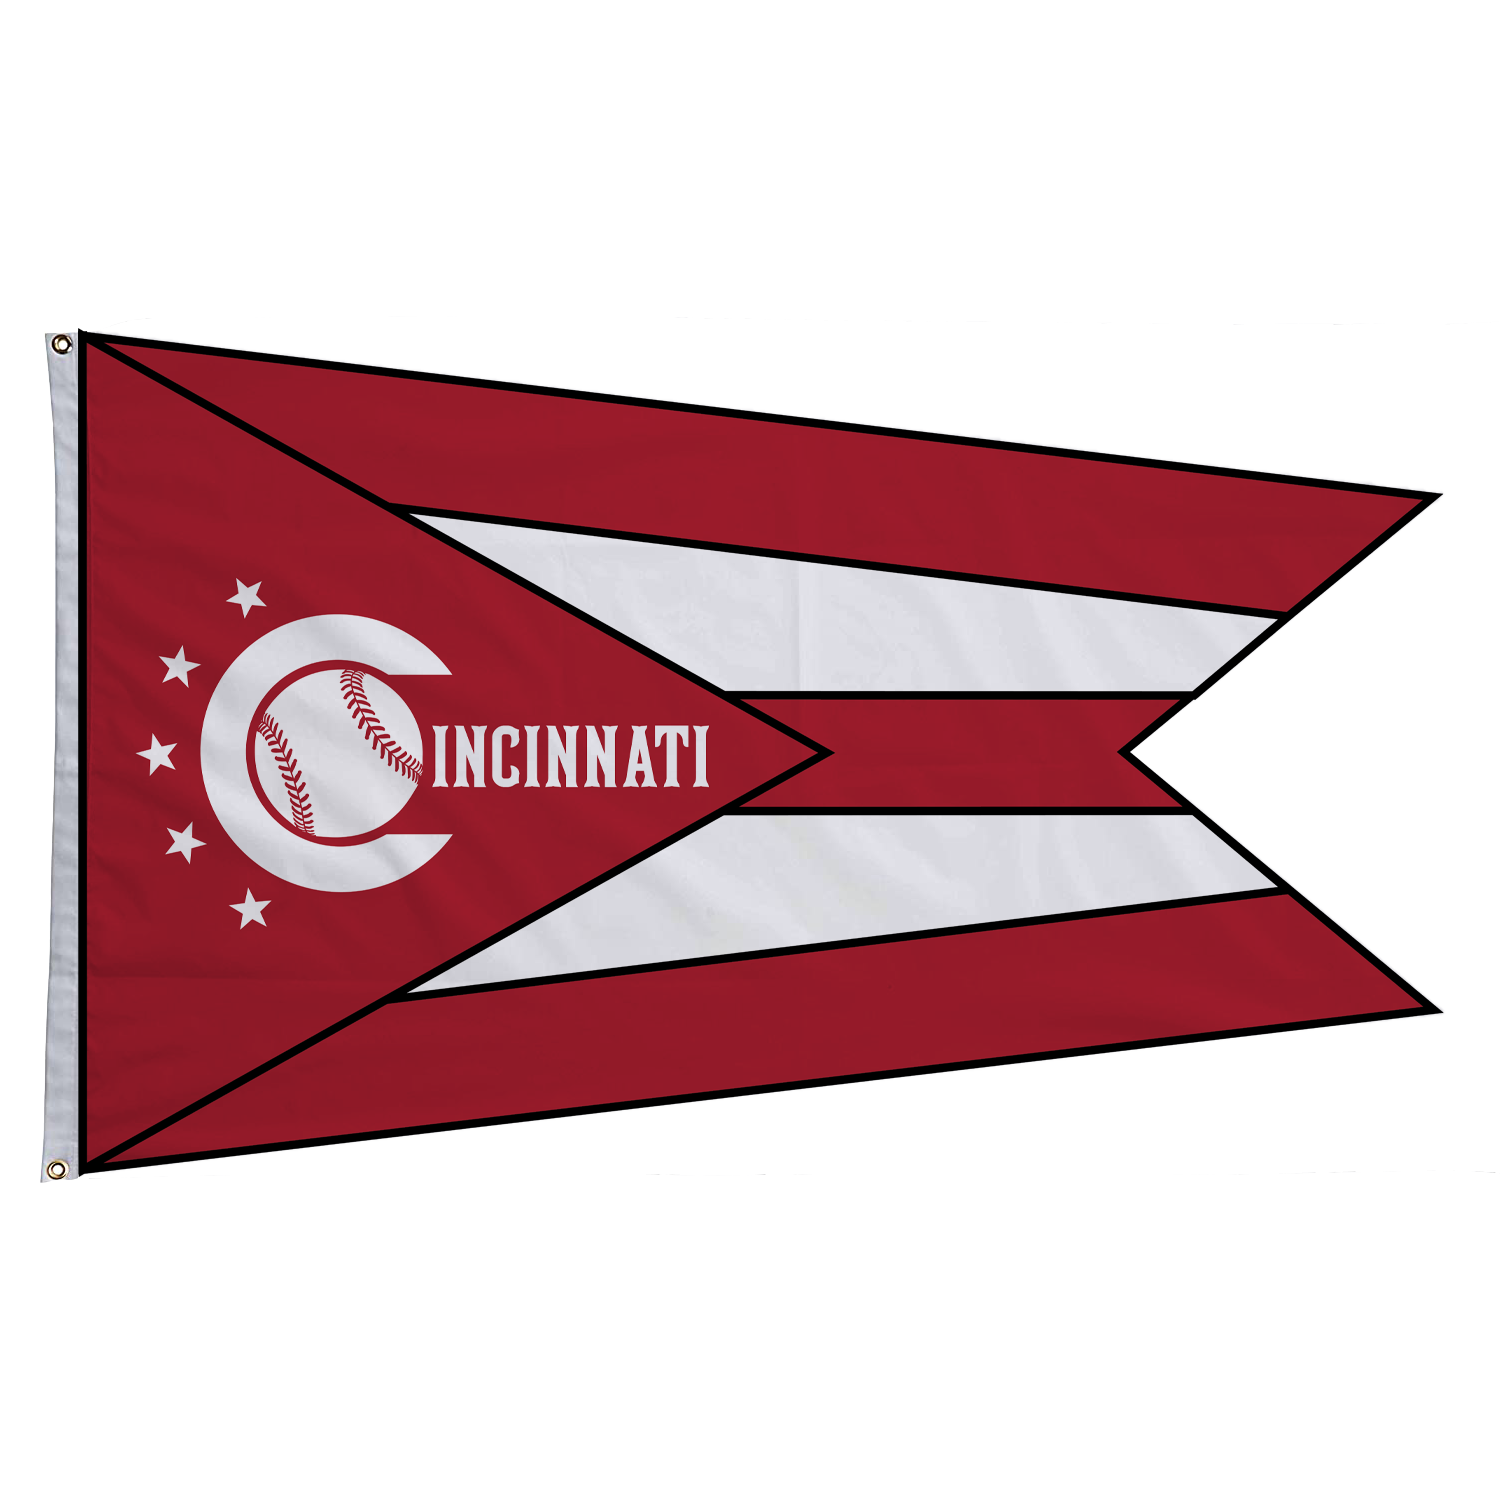 Official Cincinnati Reds Flags, Banners, Reds Pennants, Tailgating Flags